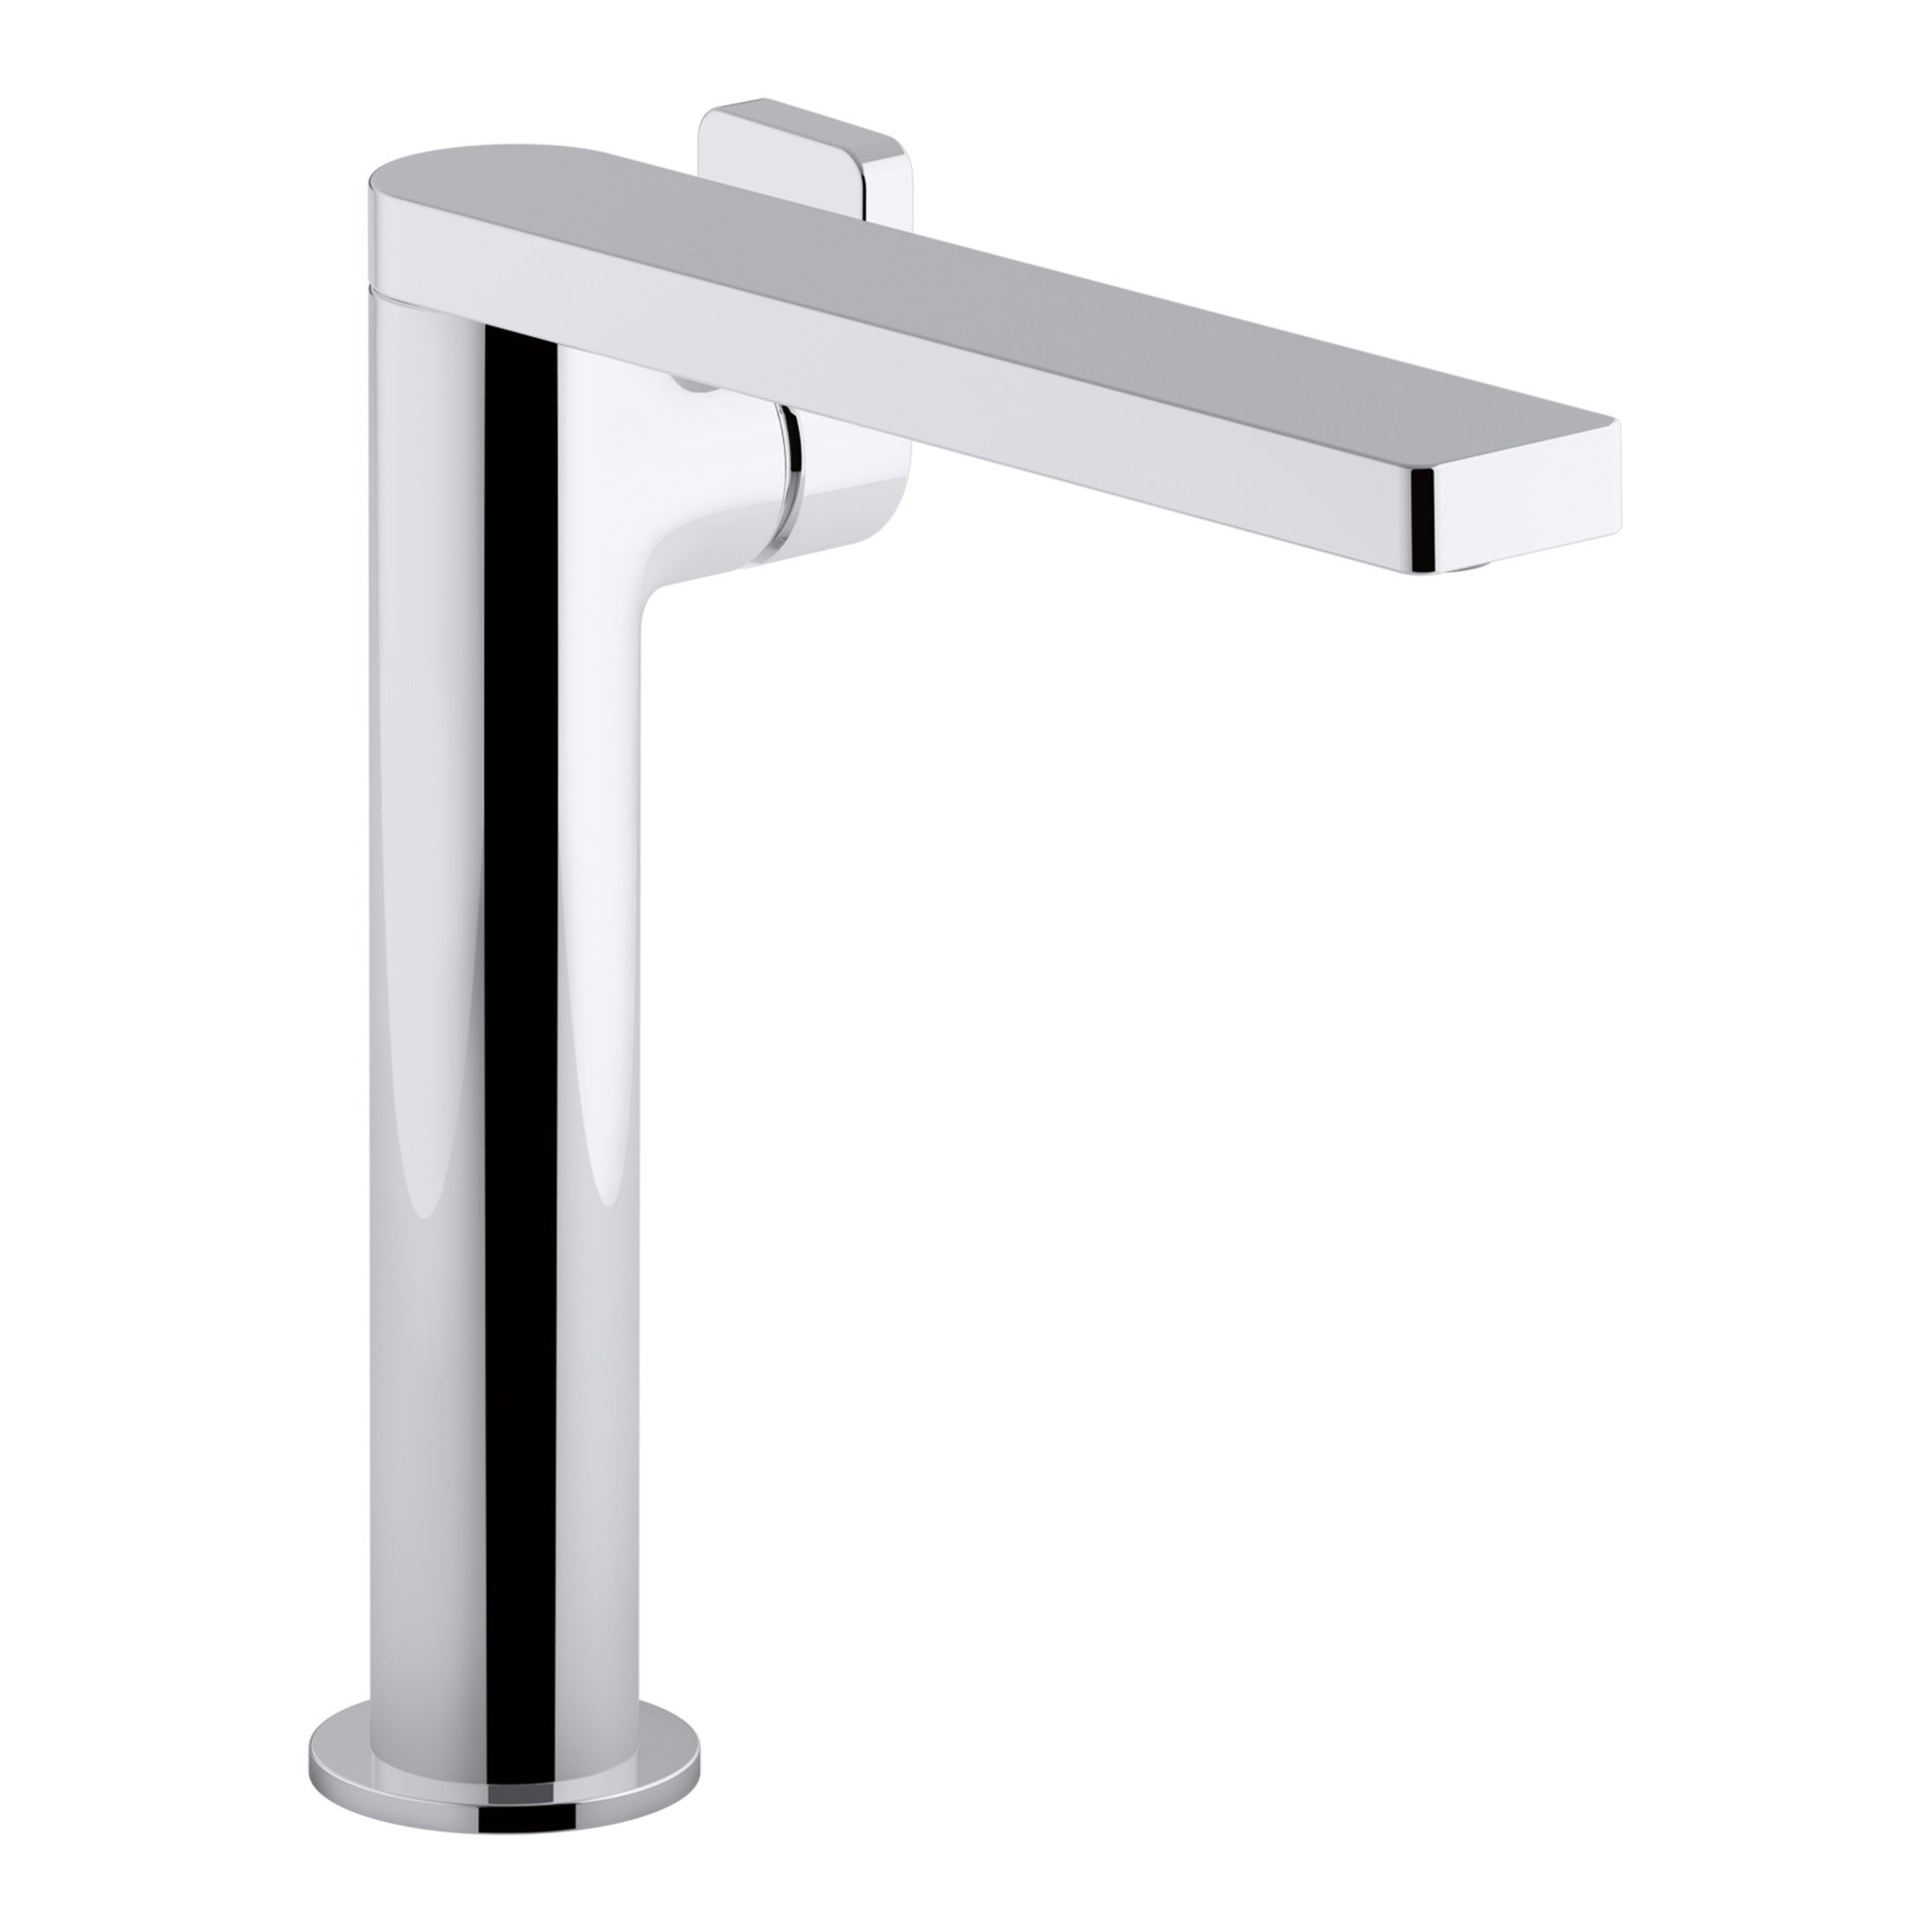 Kohler K-73168-4-CP 73168-4-CP Composed Tall Single Bathroom Sink Faucet with Lever Handle, Polished Chrome